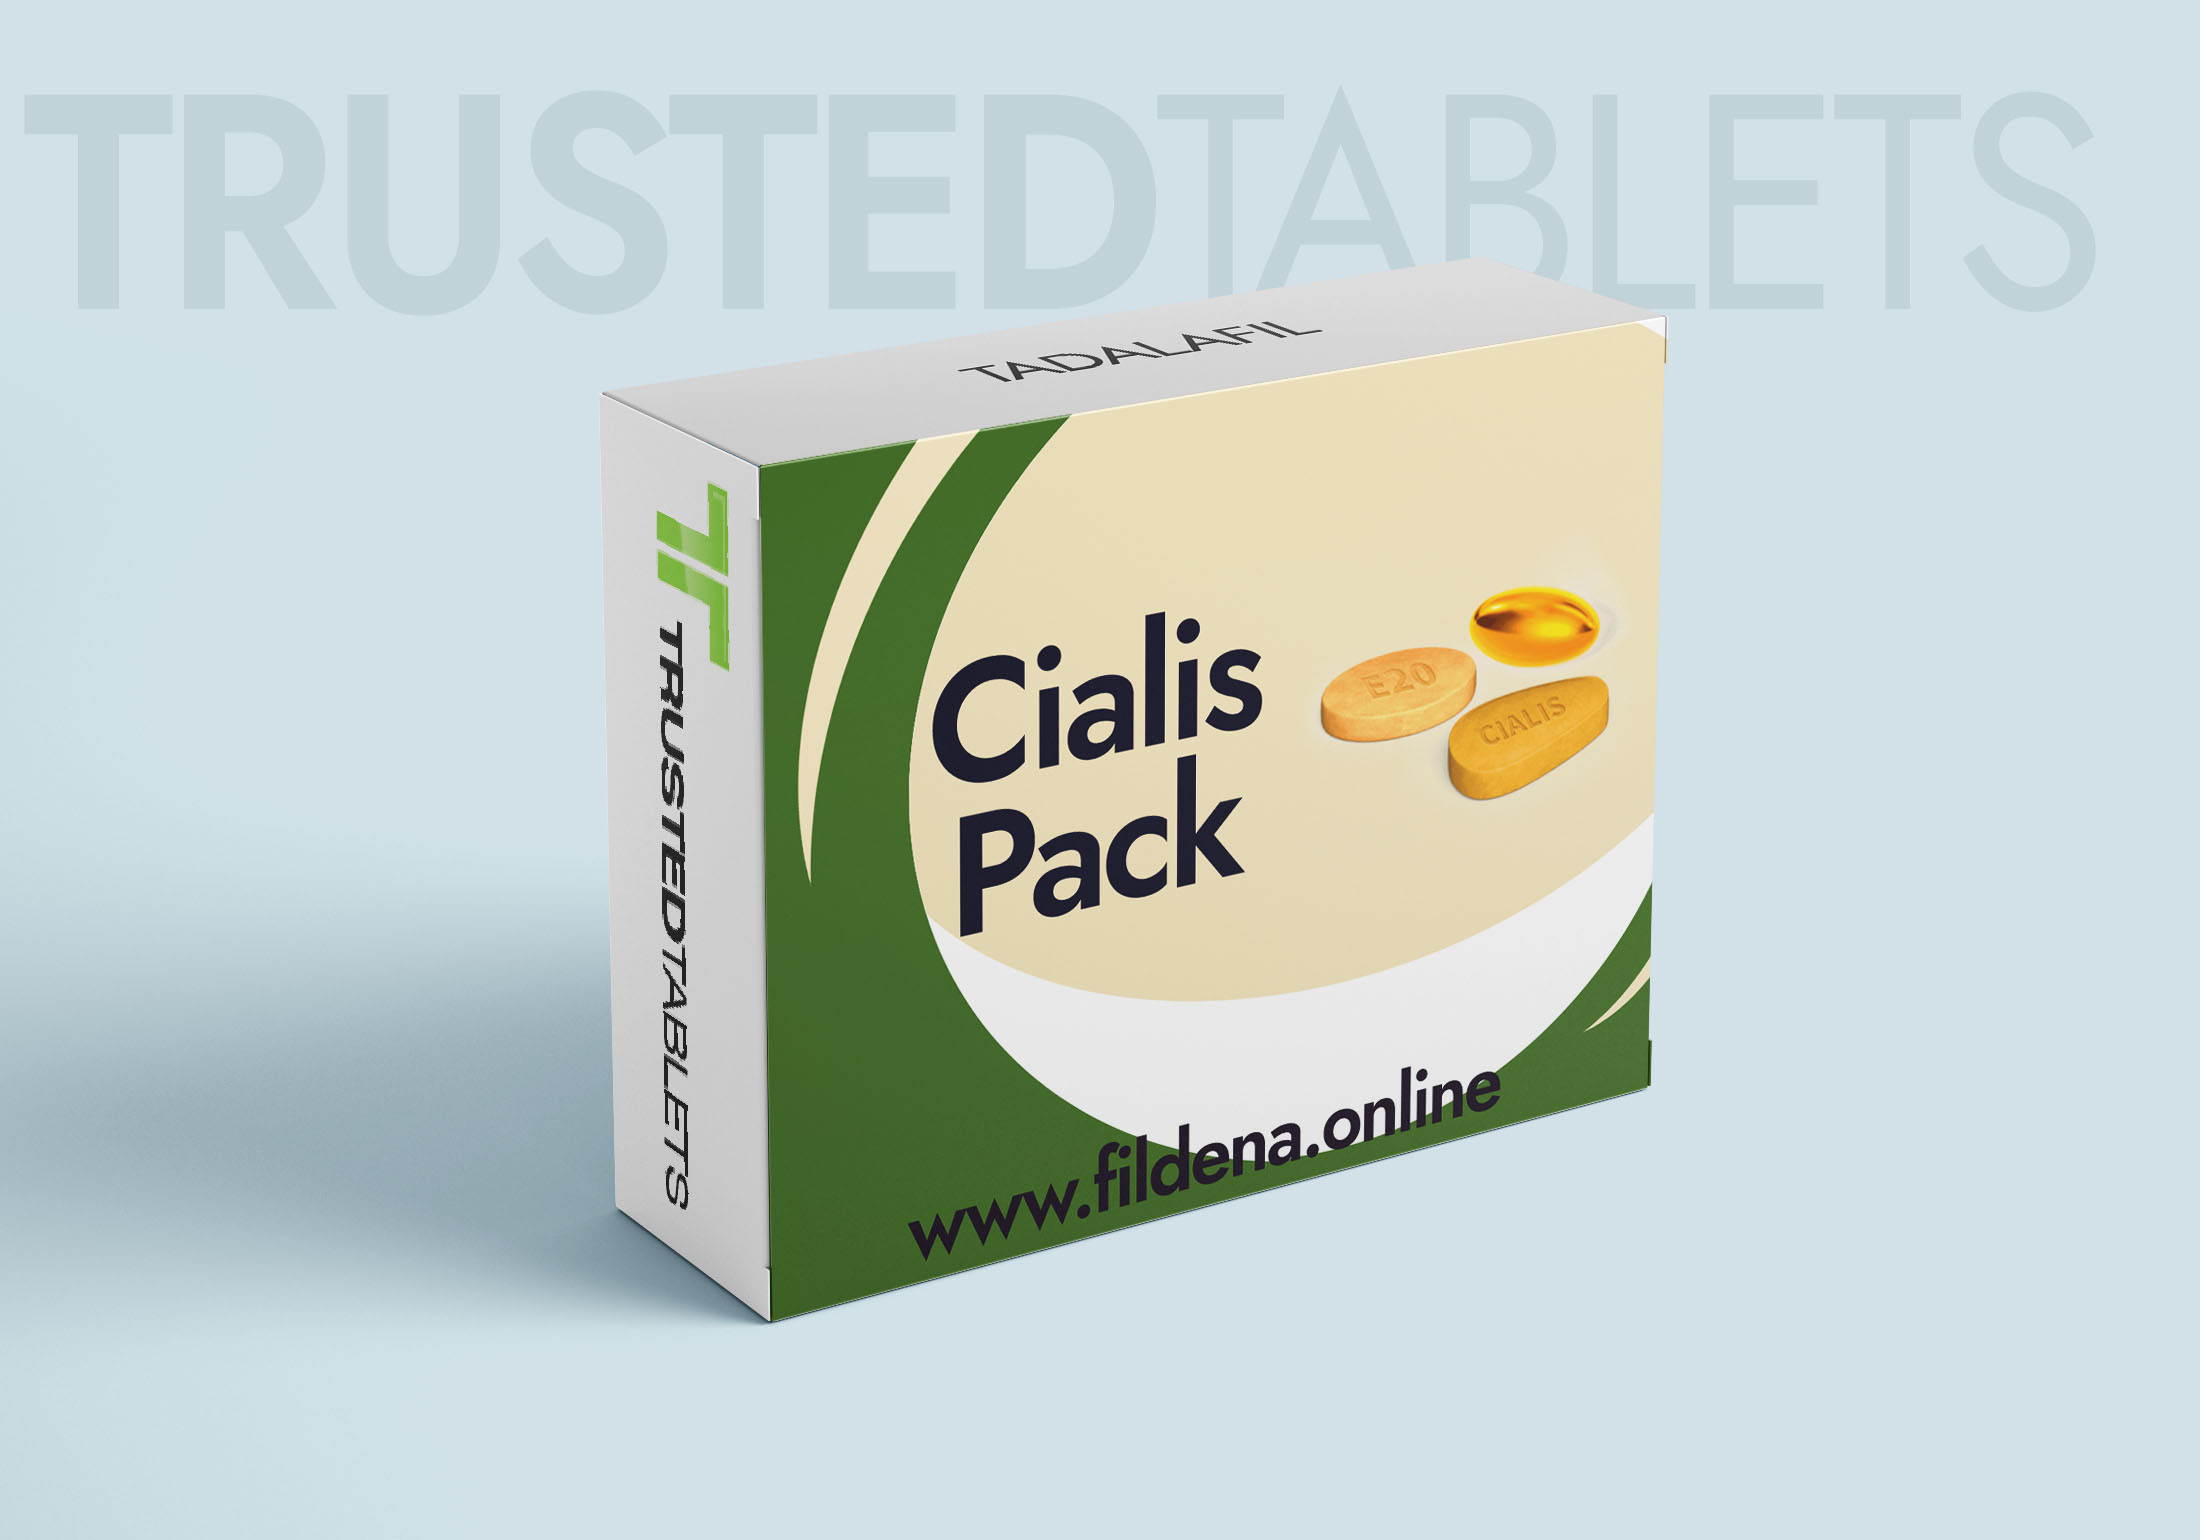 Cialis pack TrustedTablets